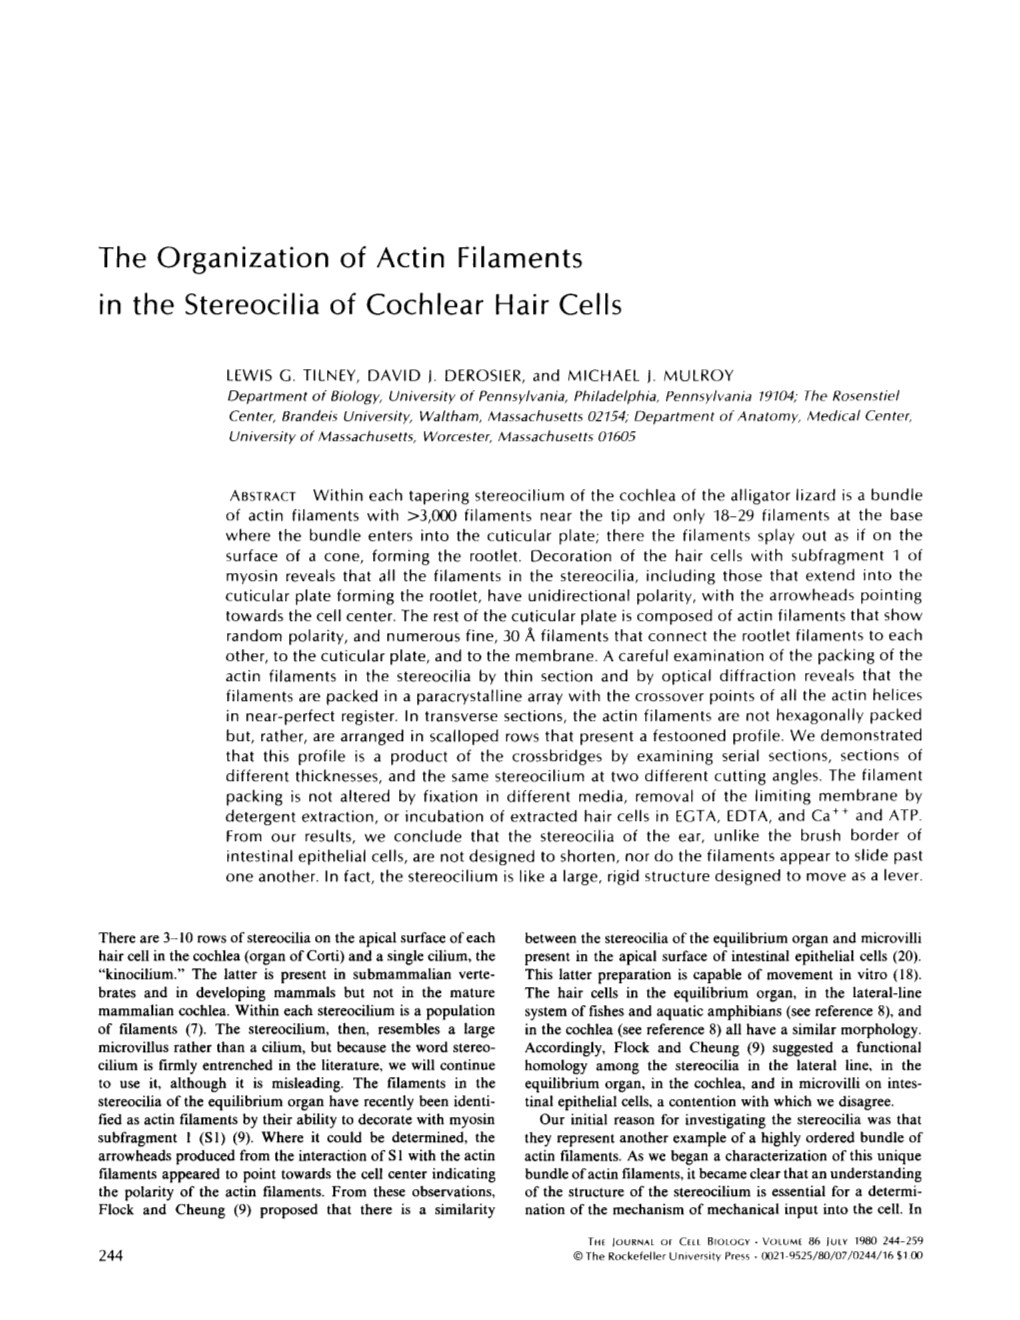 The Organization of Actin Filaments in the Stereocilia of Cochlear Hair Cells